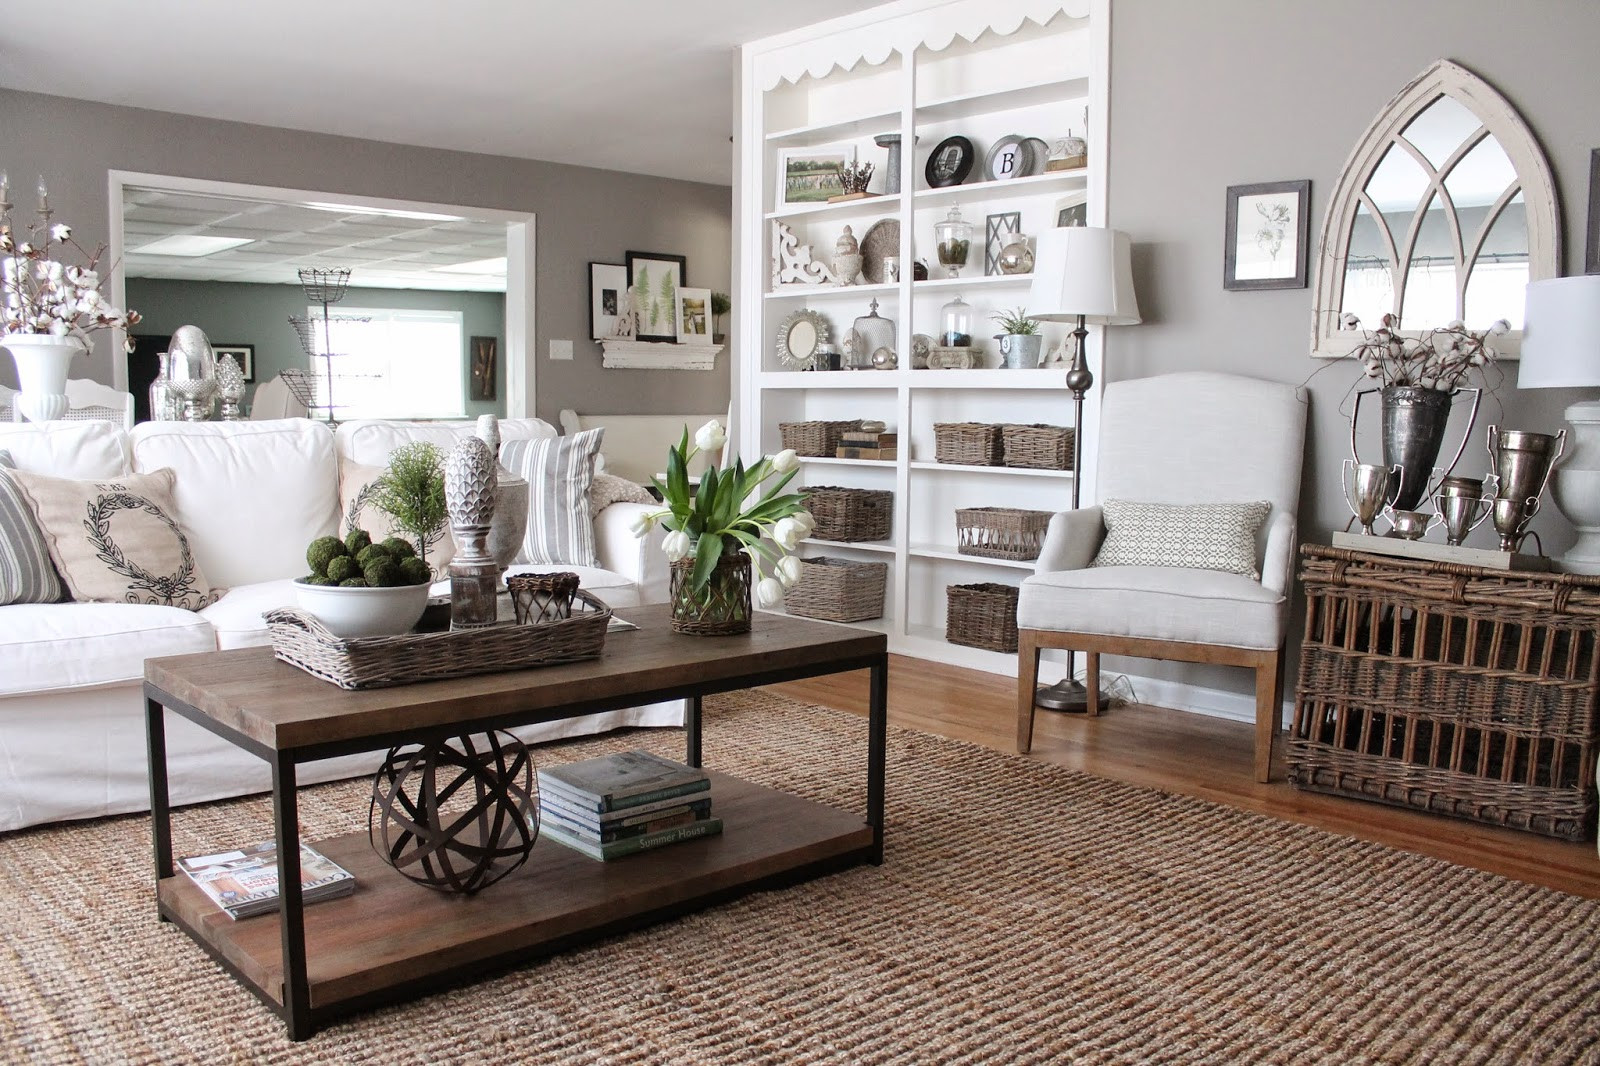 Gray Color Living Room
 12th and White How to Choose Gray Paint Colors